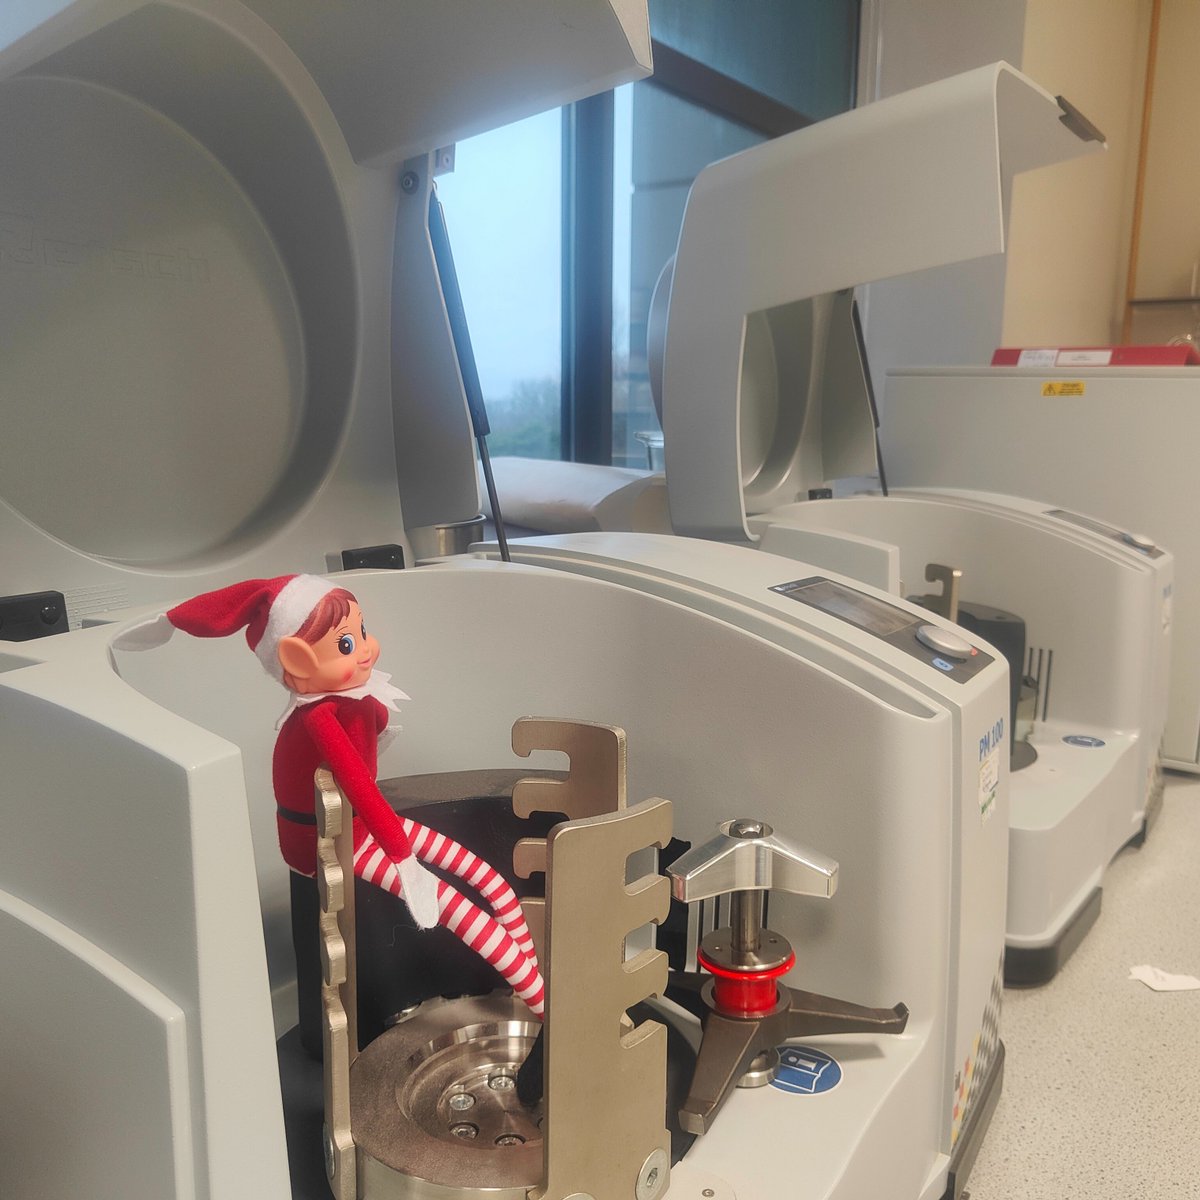 #ElfonTheShelf in our laboratories using the ball mills - I hope he has his #COSHH and #riskassessments up to date!

#WeAreUU